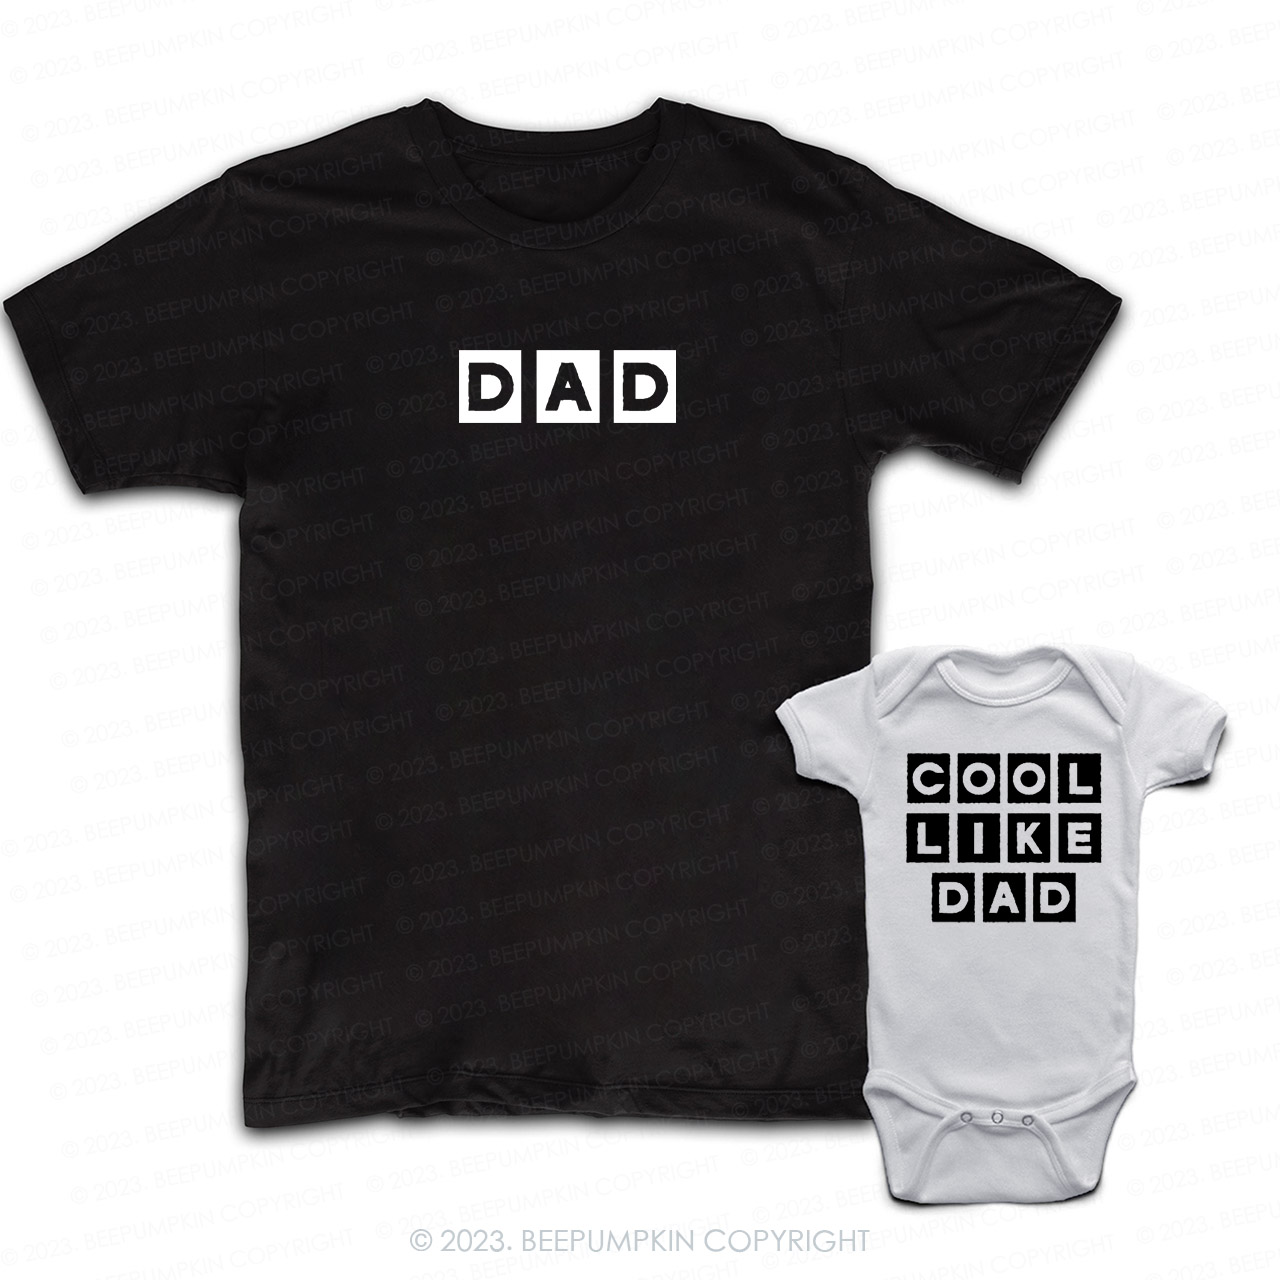 Dad & Cool Like Dad Matching T-Shirts For Dad&Me